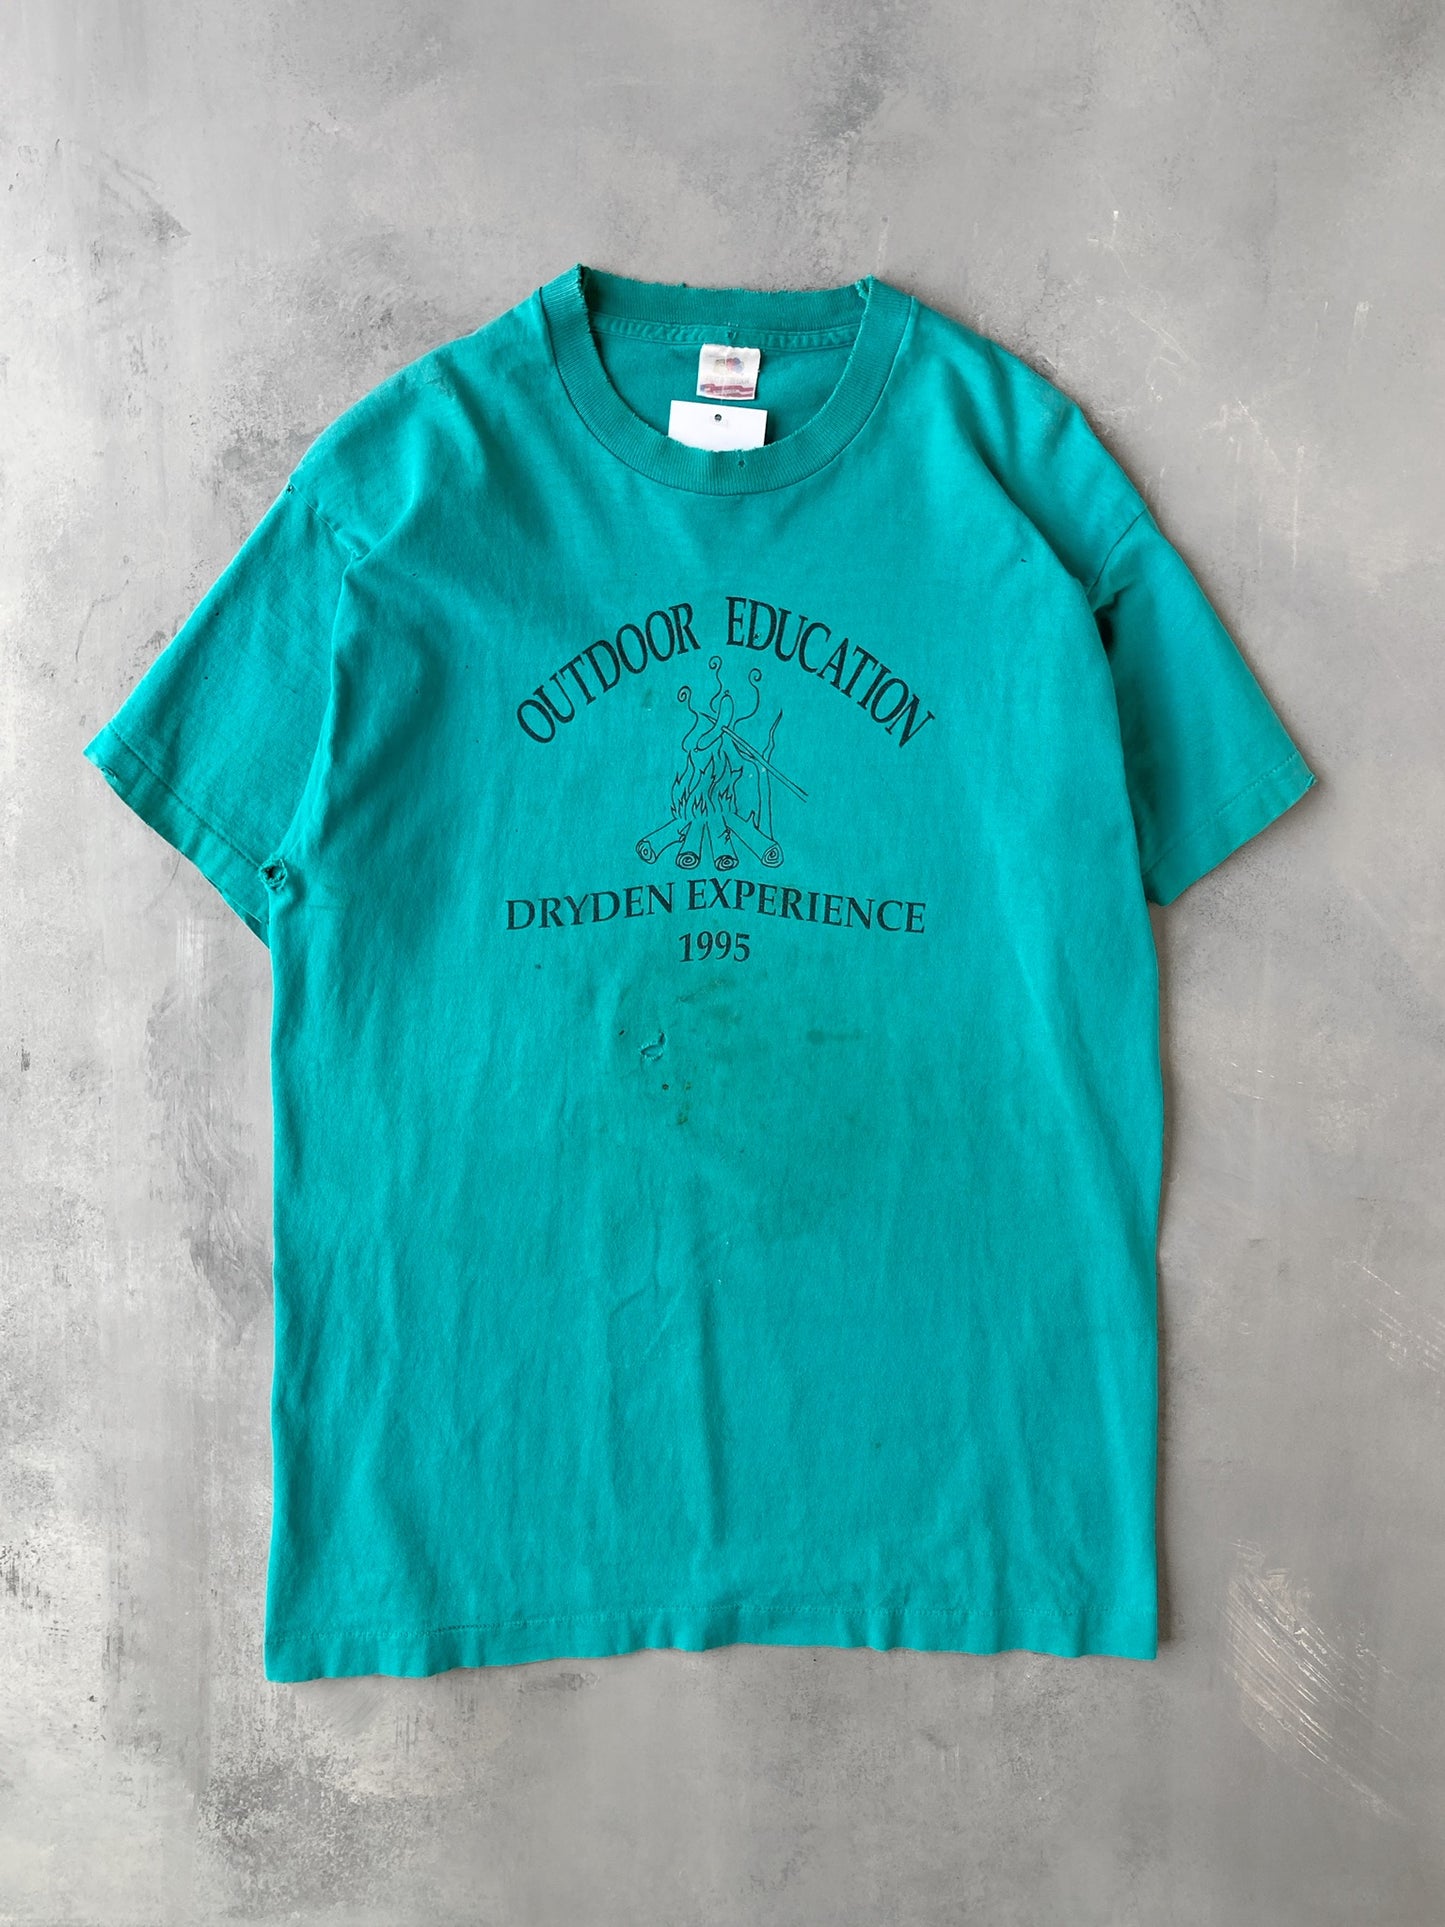 Thrashed Dryden Outdoor Education Tee 90's - Large